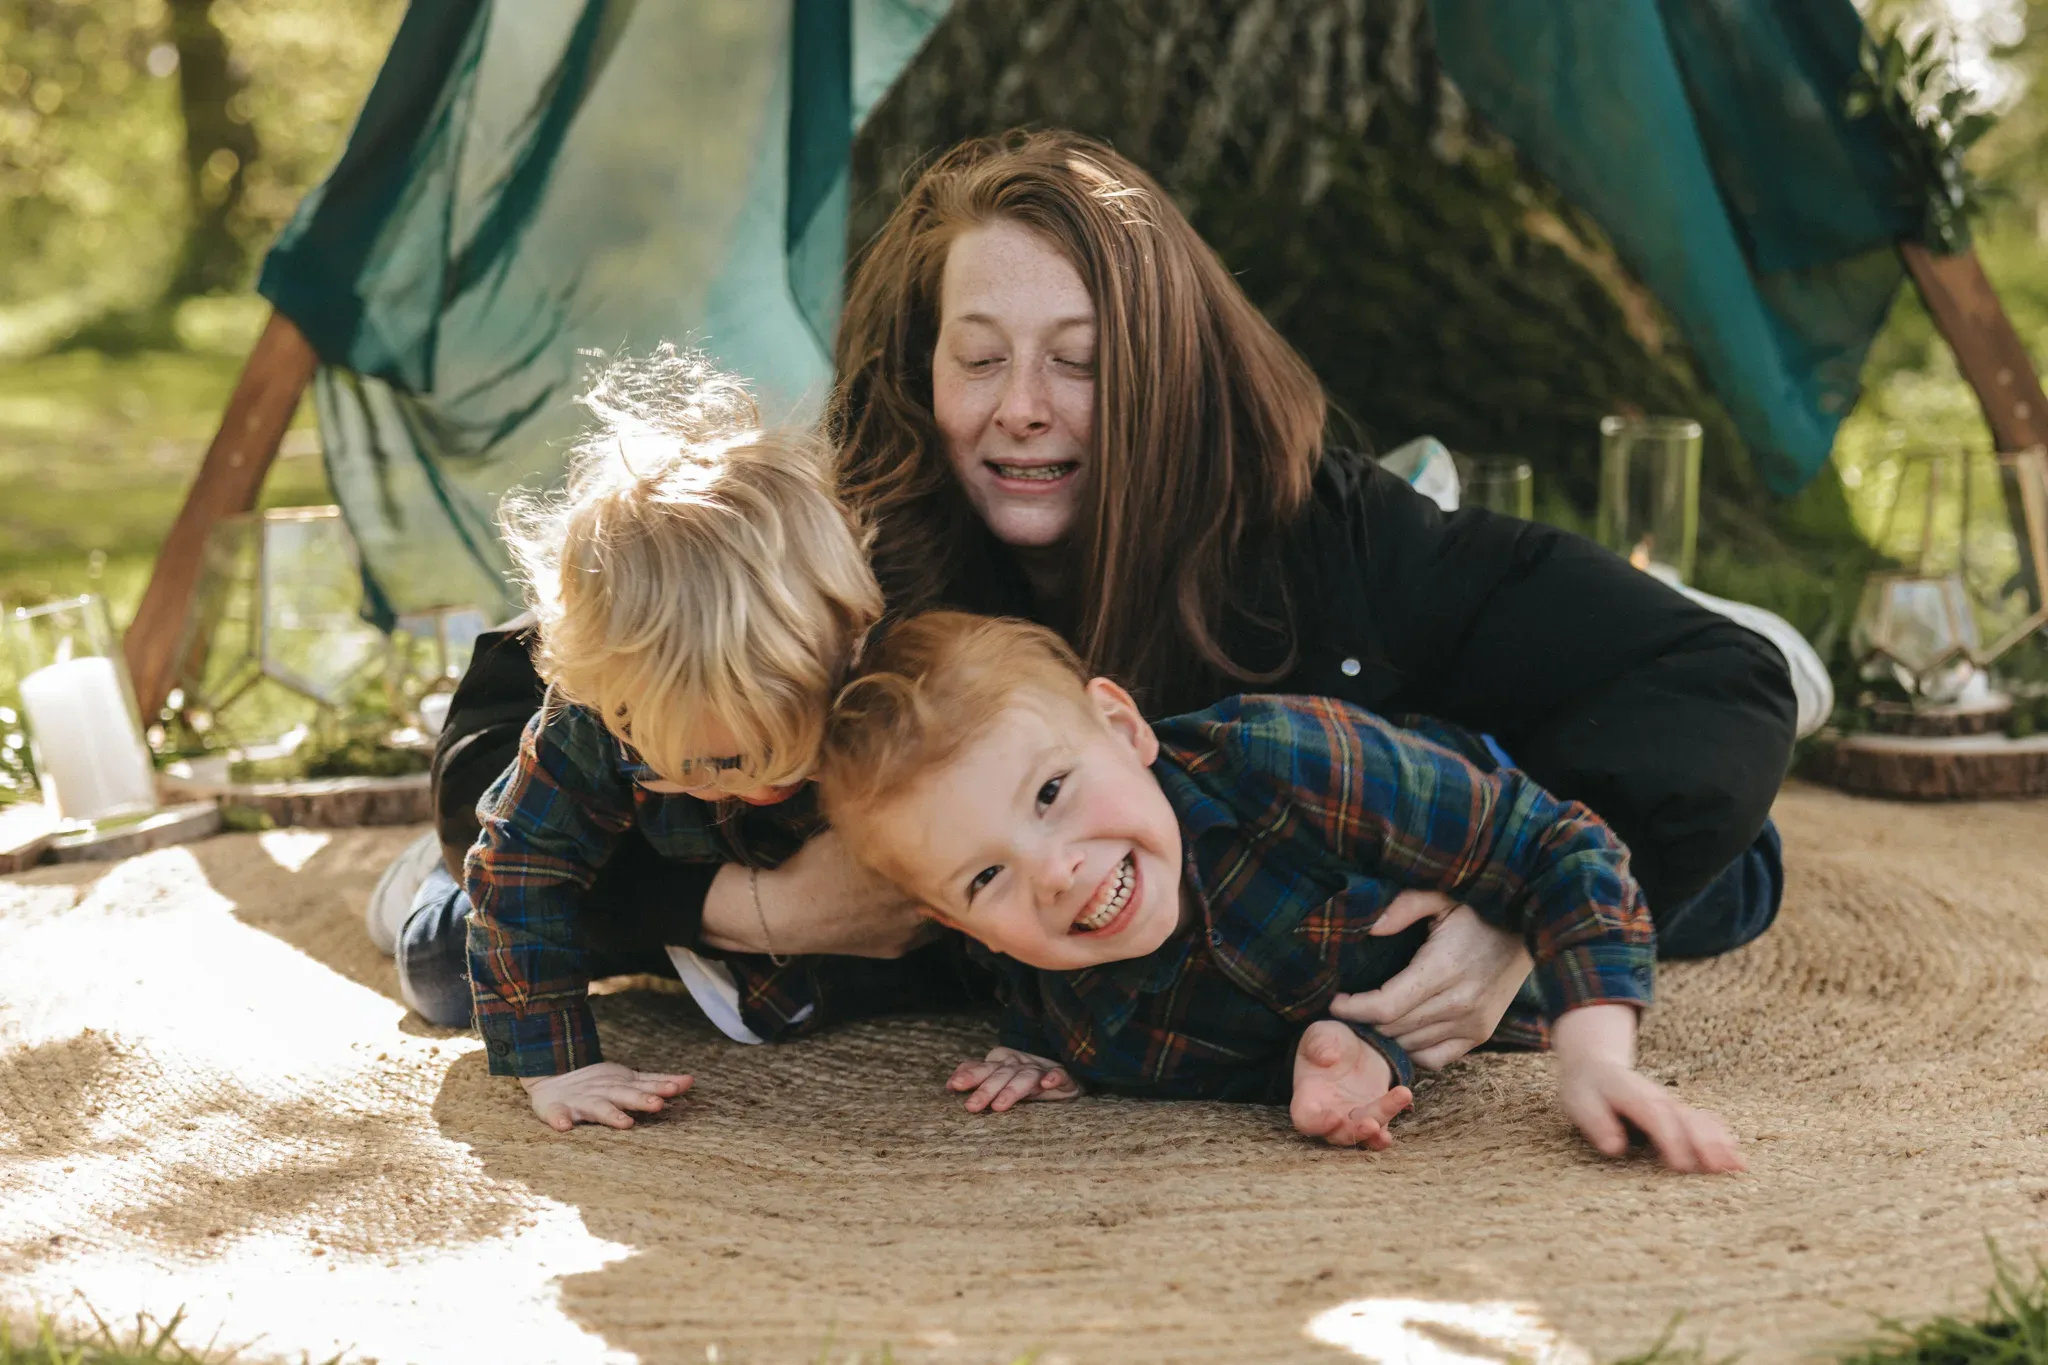 A joyful woman playing with two young boys in a plaid shirt under a makeshift tent outdoors. they're smiling, with sunlight filtering through trees in the background.